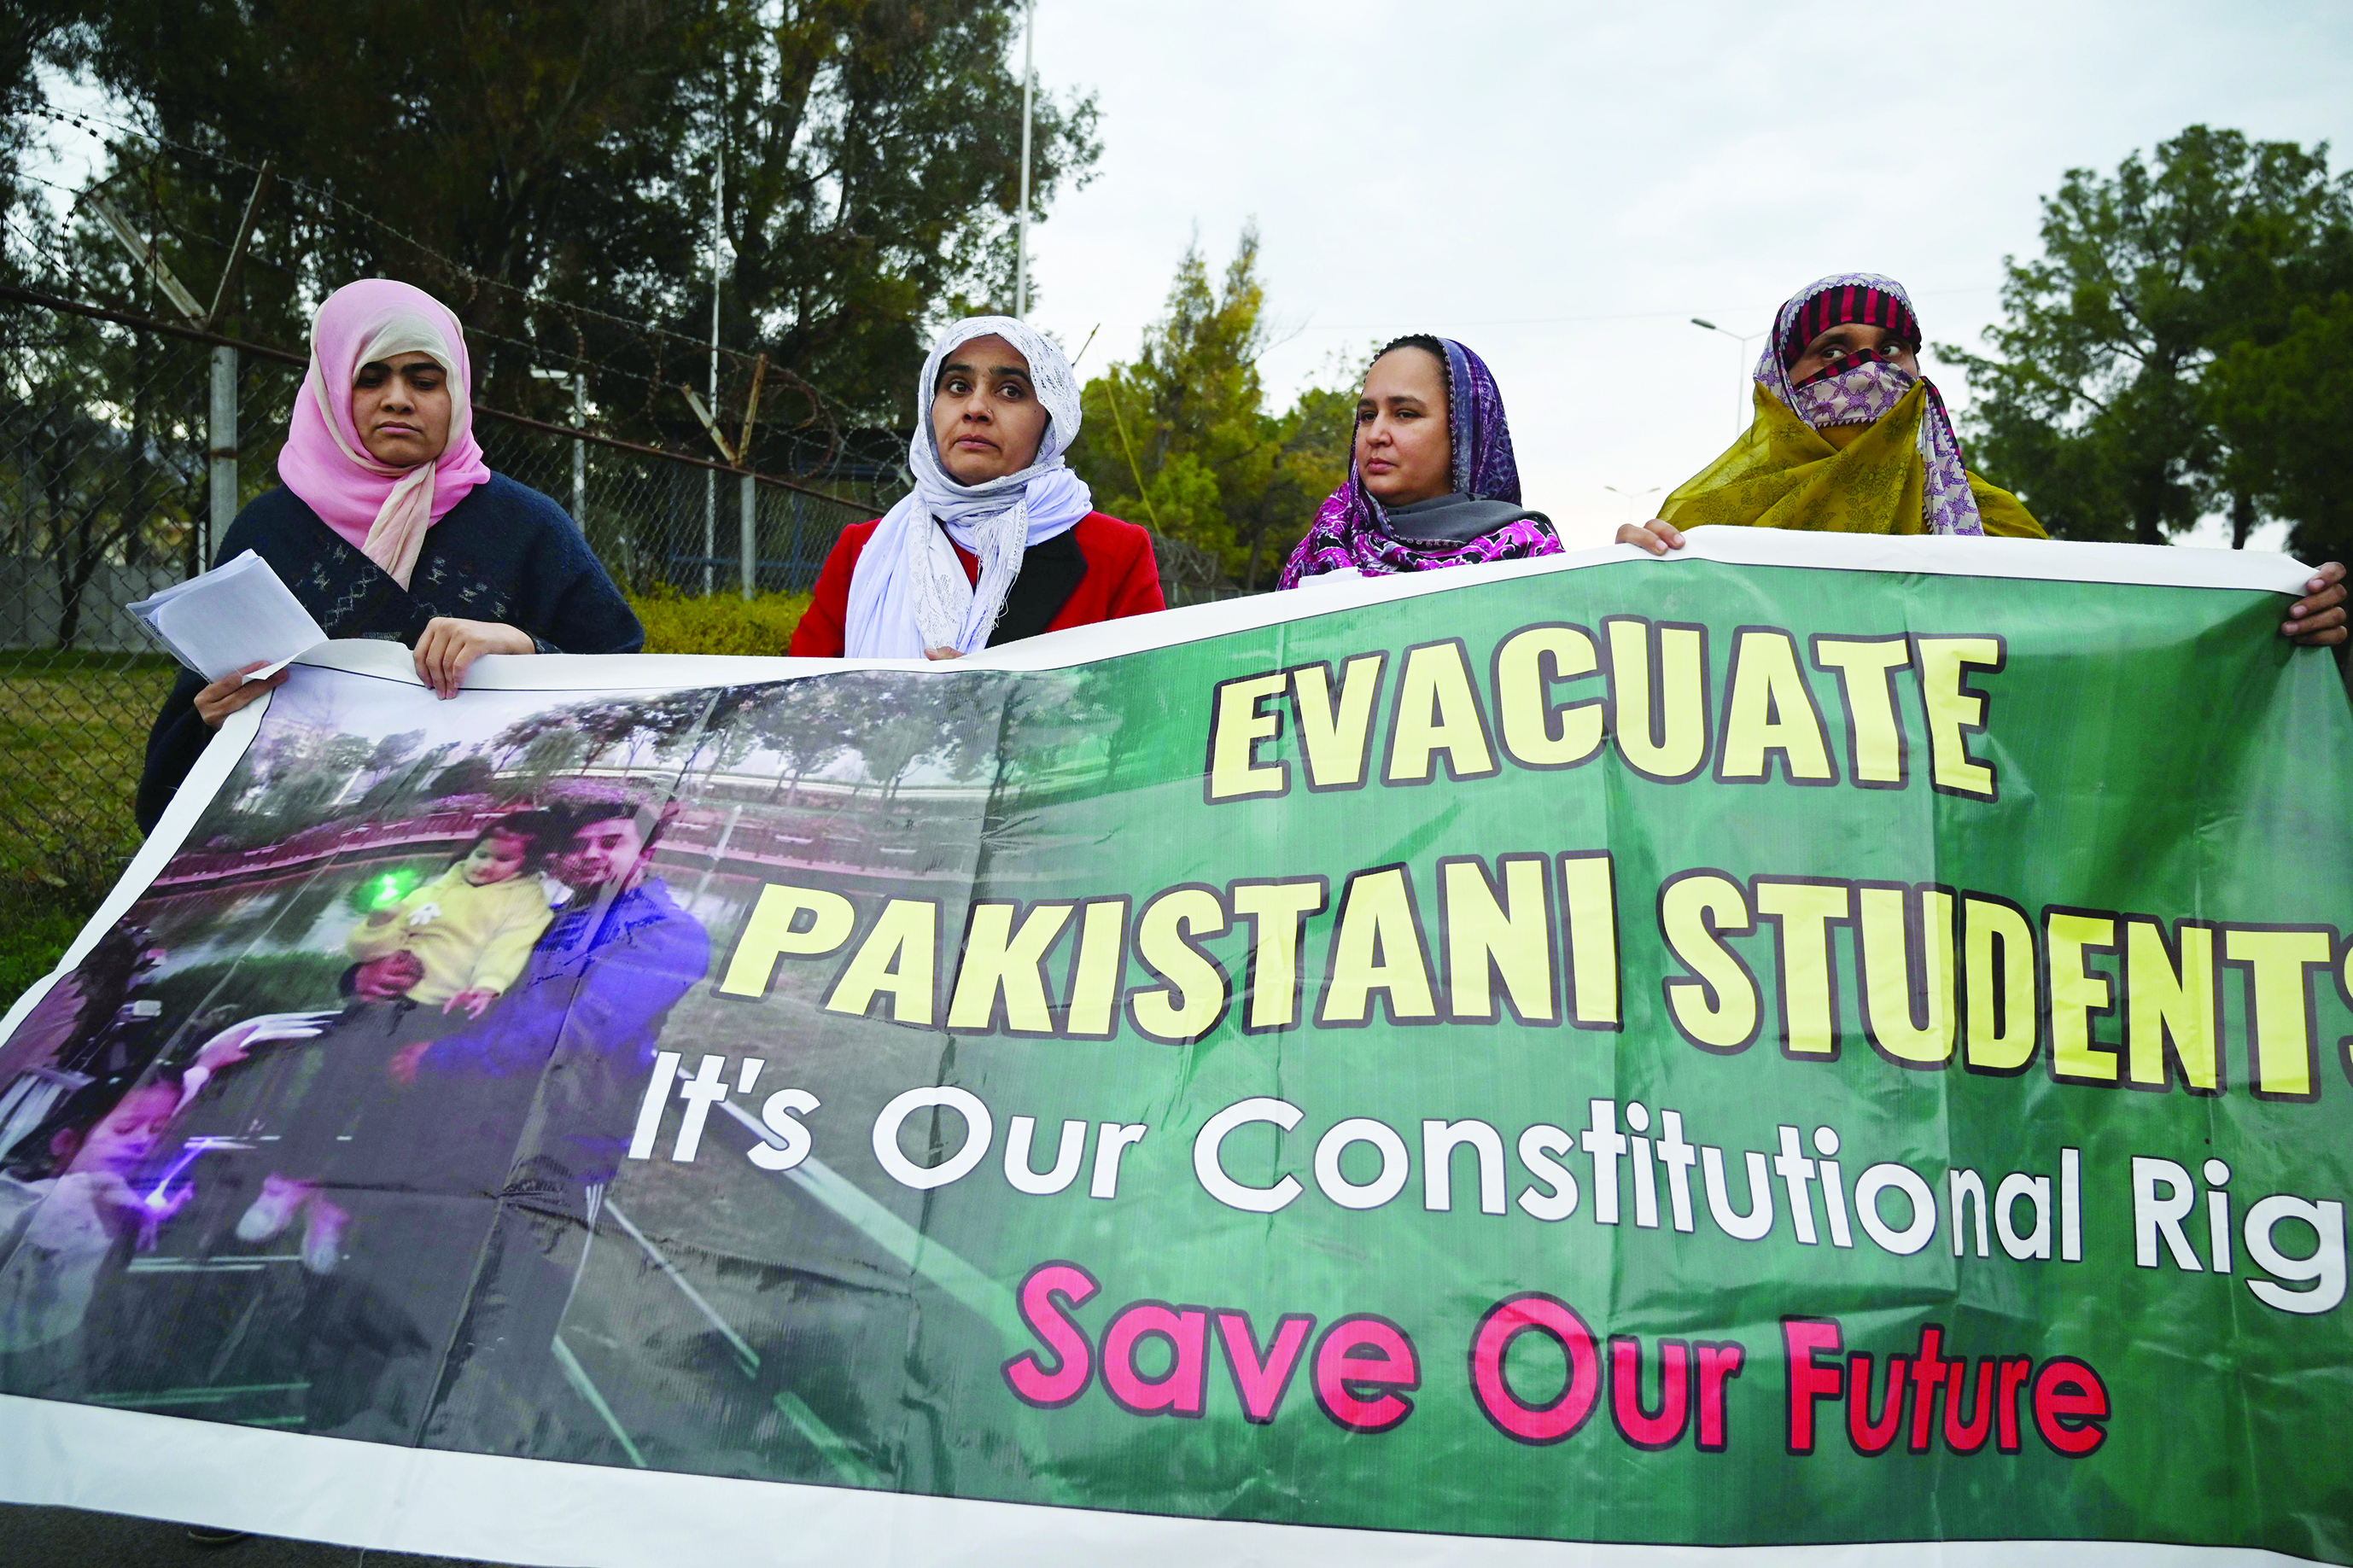 Parents and relatives of Pakistani students in the Chinese city of Wuhan, where the outbreak of the COVID-19 coronavirus began, hold placards during a protest to demand Pakistan's government the evacuation of their loved ones in Islamabad on February 19, 2020. - The death toll from China's new coronavirus epidemic jumped past 2,000 on February 19 after 136 more people died, with the number of new cases falling for a second straight day, according to the National Health Commission. (Photo by Aamir QURESHI / AFP)